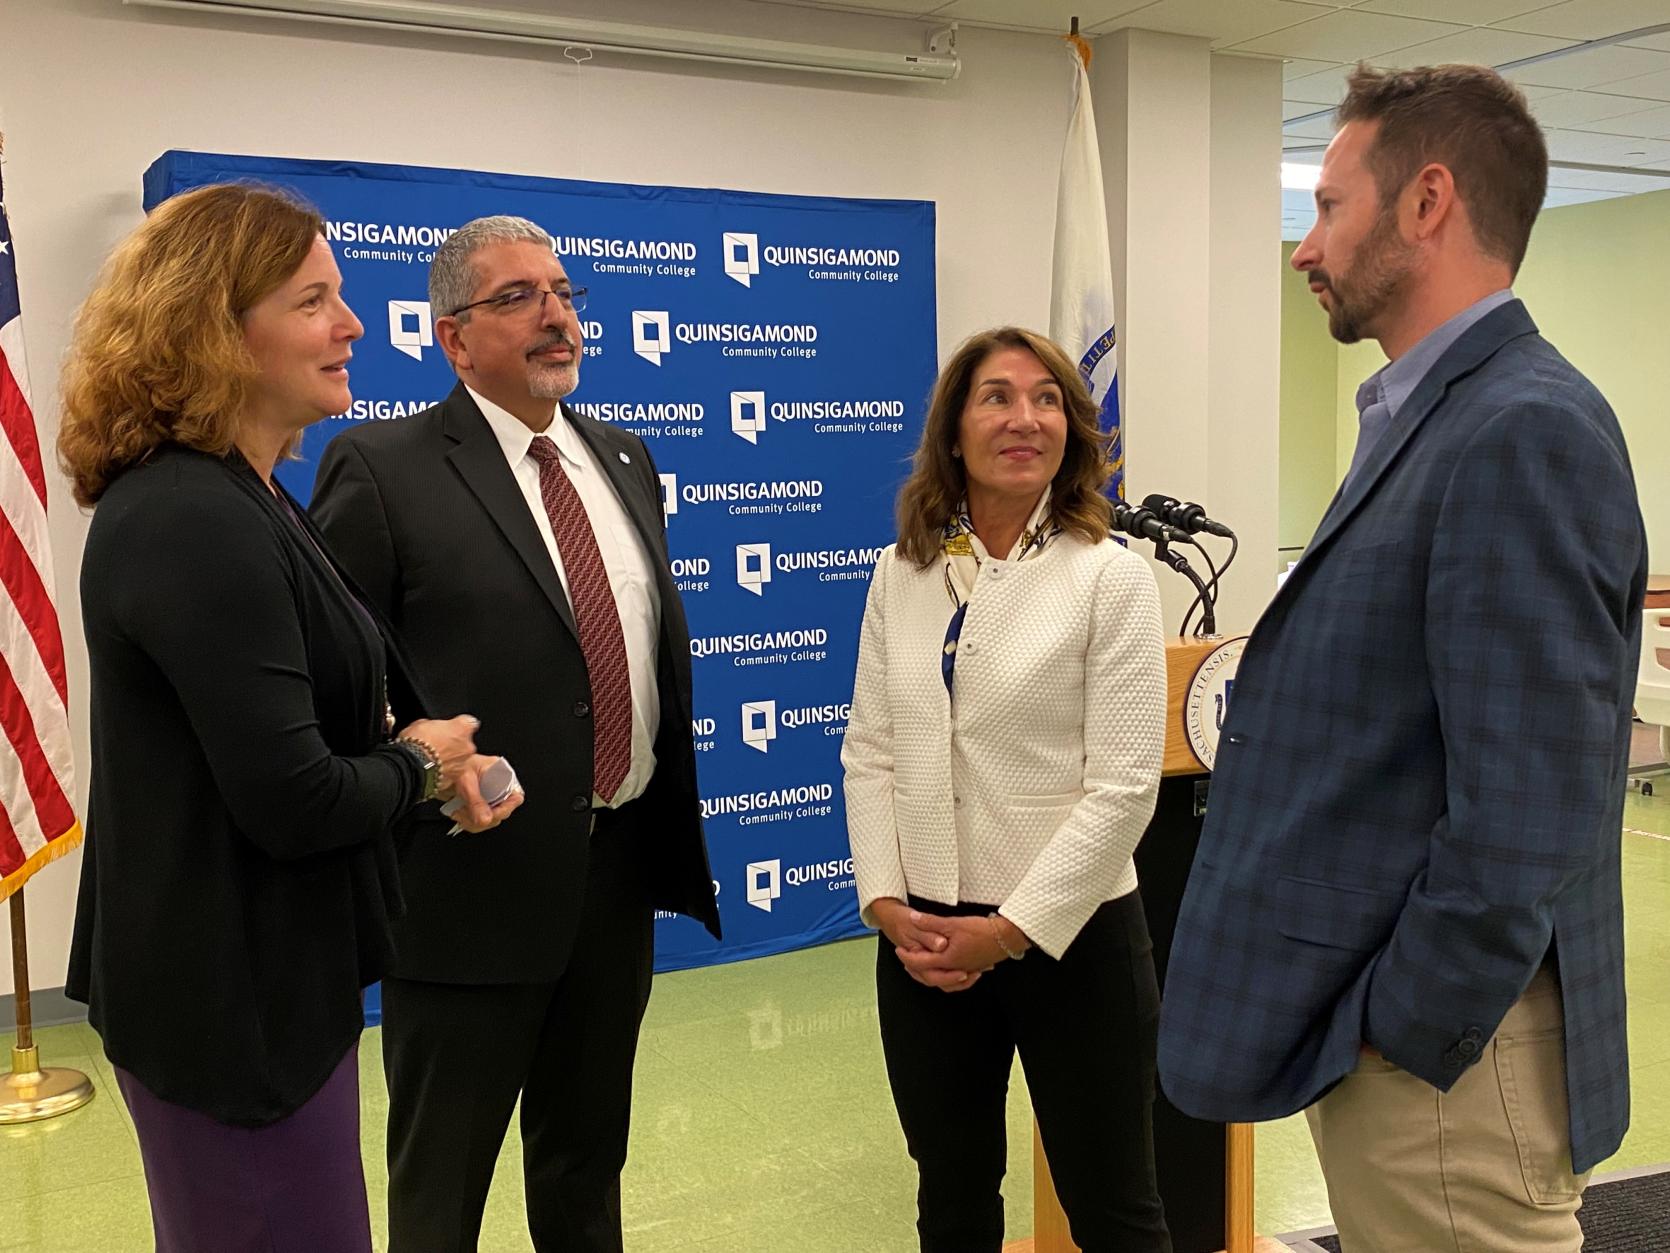 Pictured left to right: Secretary of Labor and Workforce Development Rosalin Acosta, Quinsigamond Community College (QCC) President Dr. Luis G. Pedraja, Lt. Governor Karyn Polito, and Massachusetts Biomedical Initiatives (MBI) President and CEO Jon Weaver. 